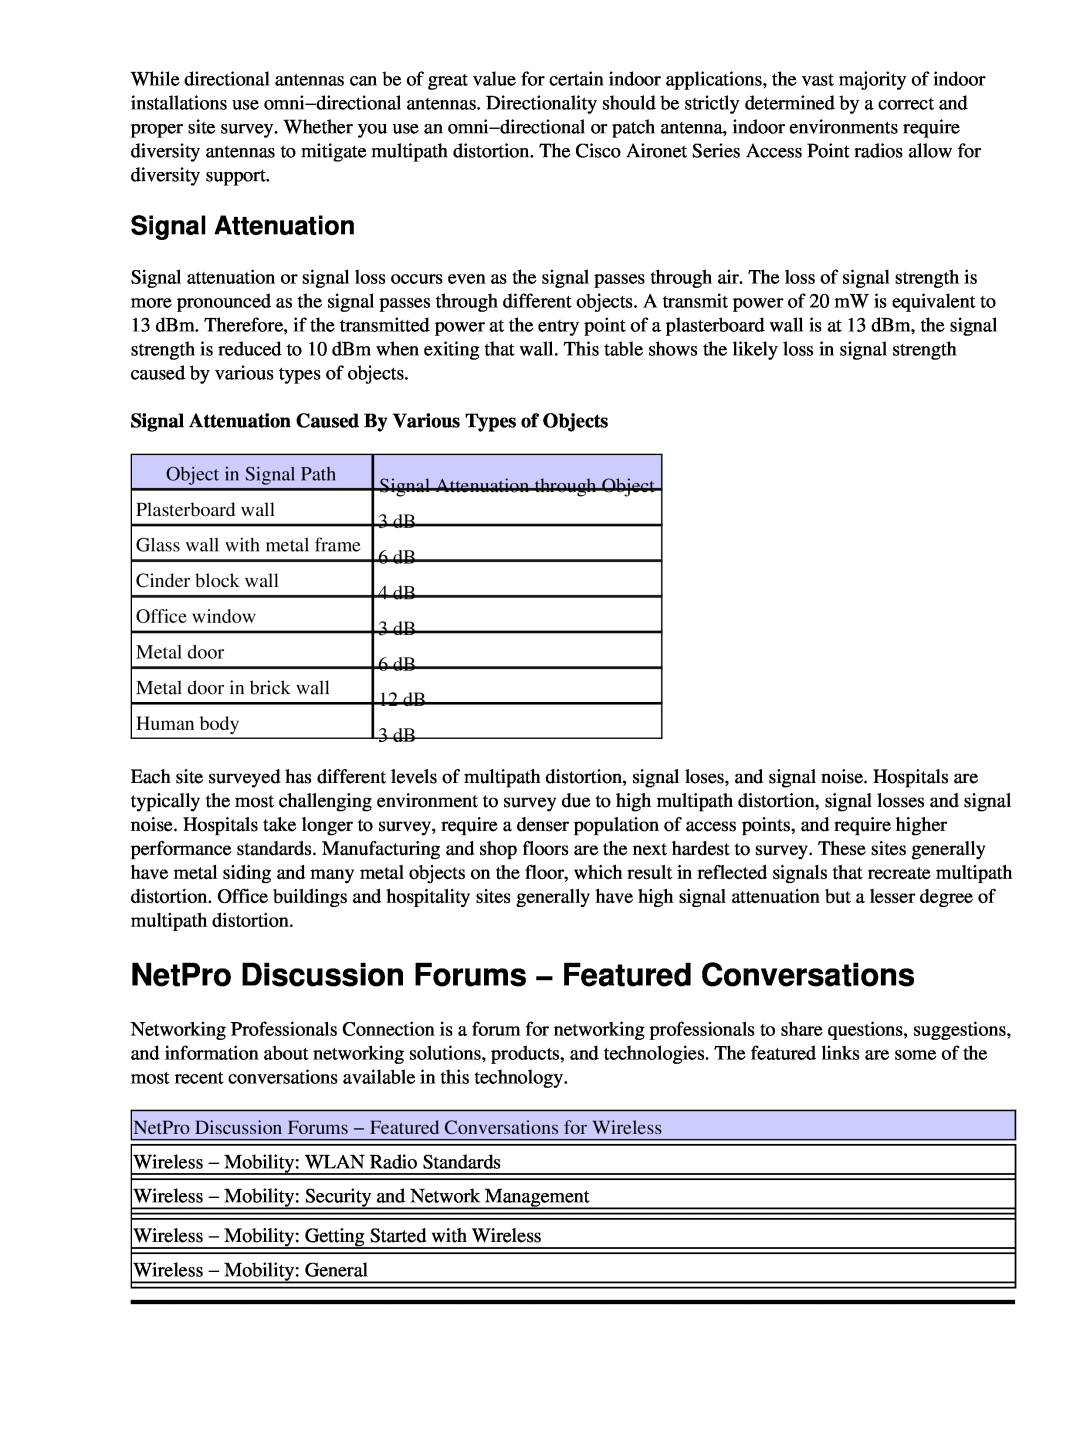 Cisco Systems 71642 manual NetPro Discussion Forums − Featured Conversations, Signal Attenuation 